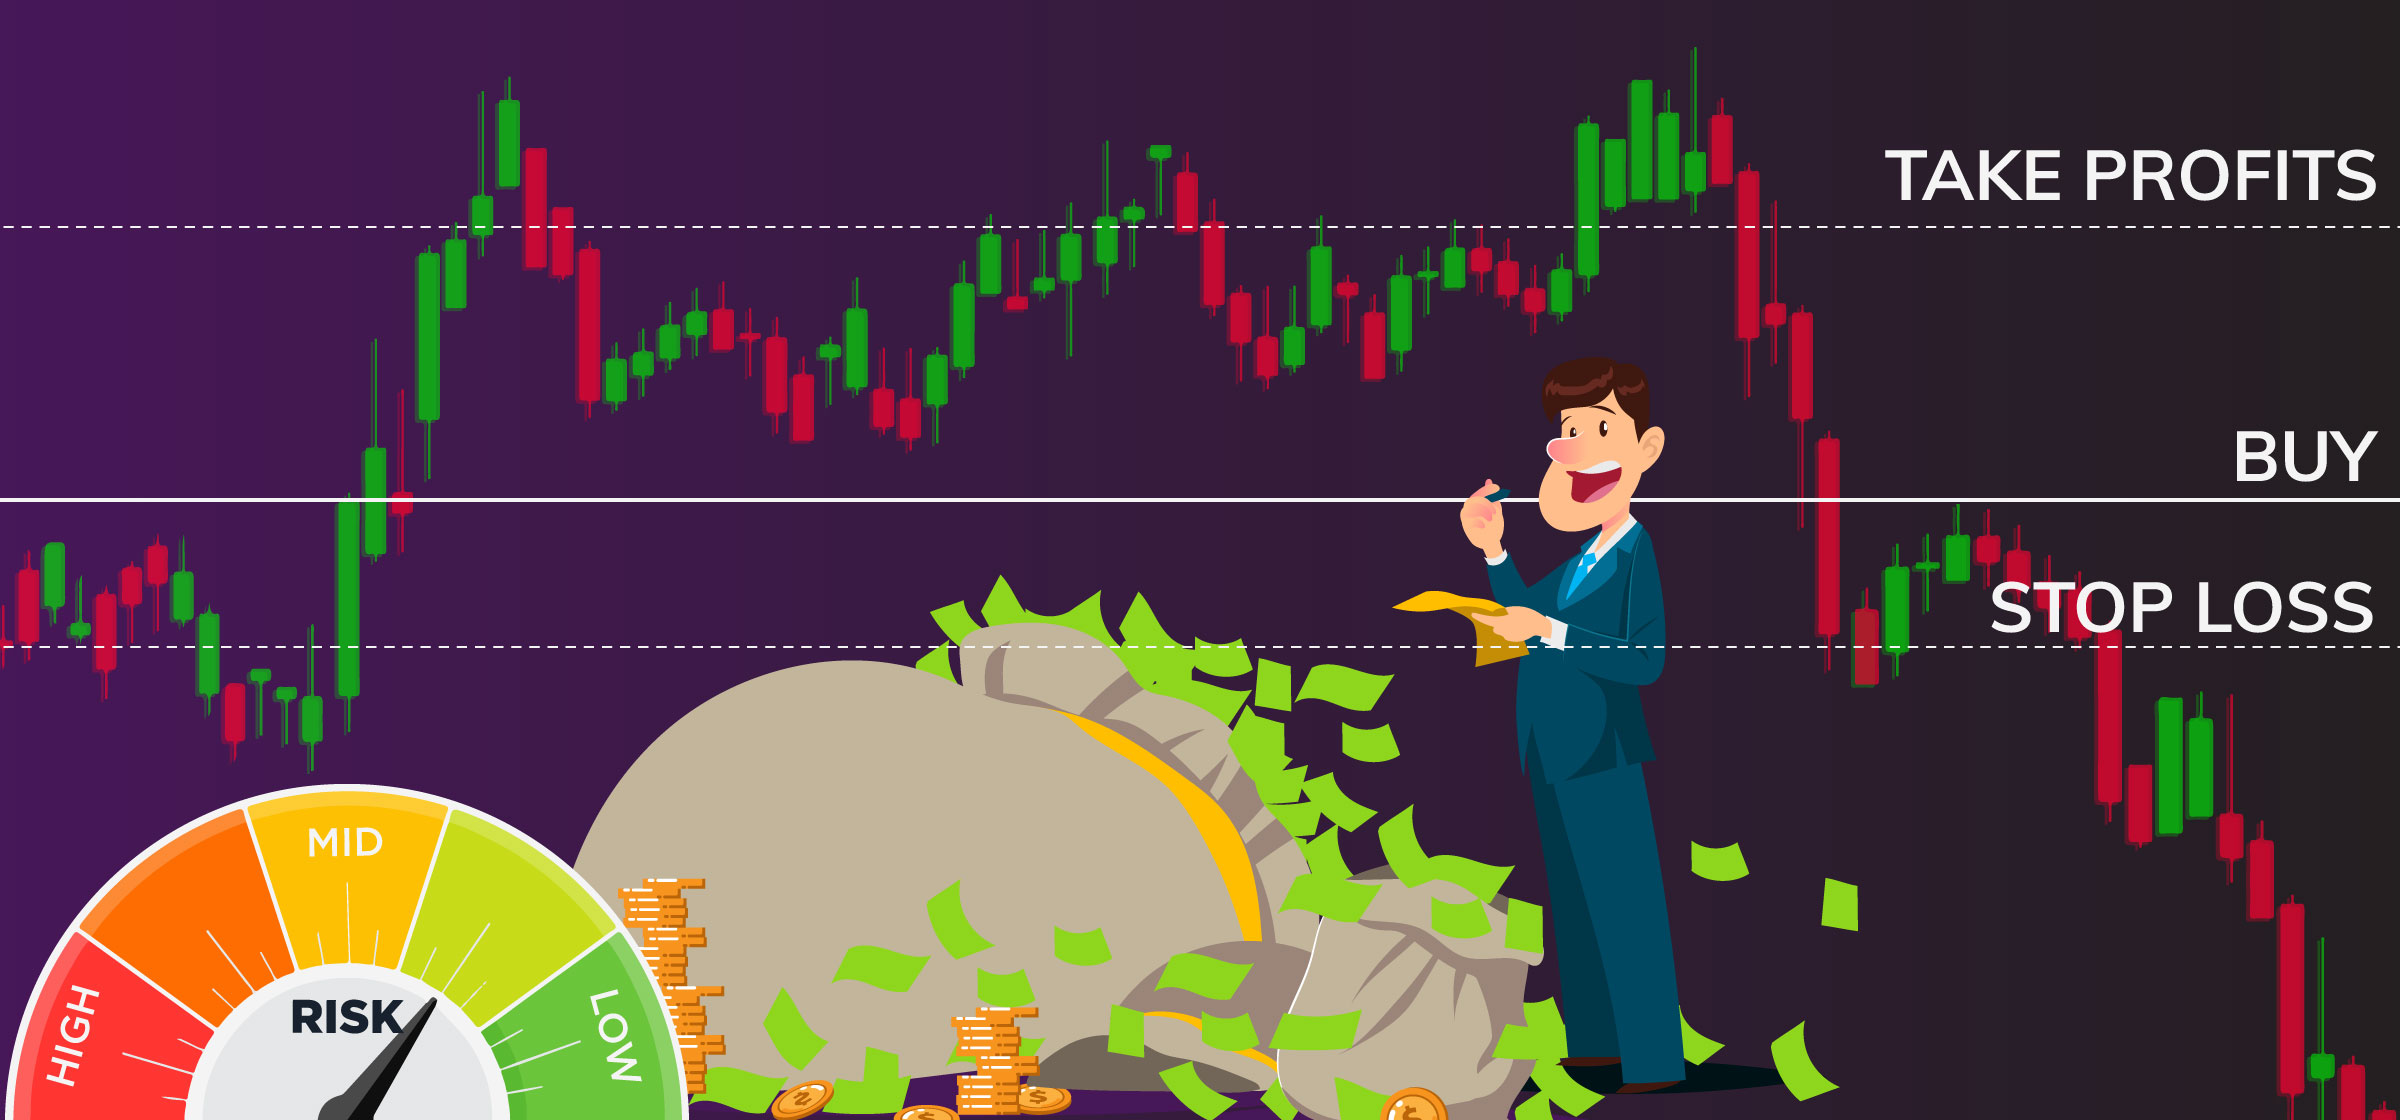 crypto-traders-guide-know-when-to-take-profit-know-when-to-cut-losses